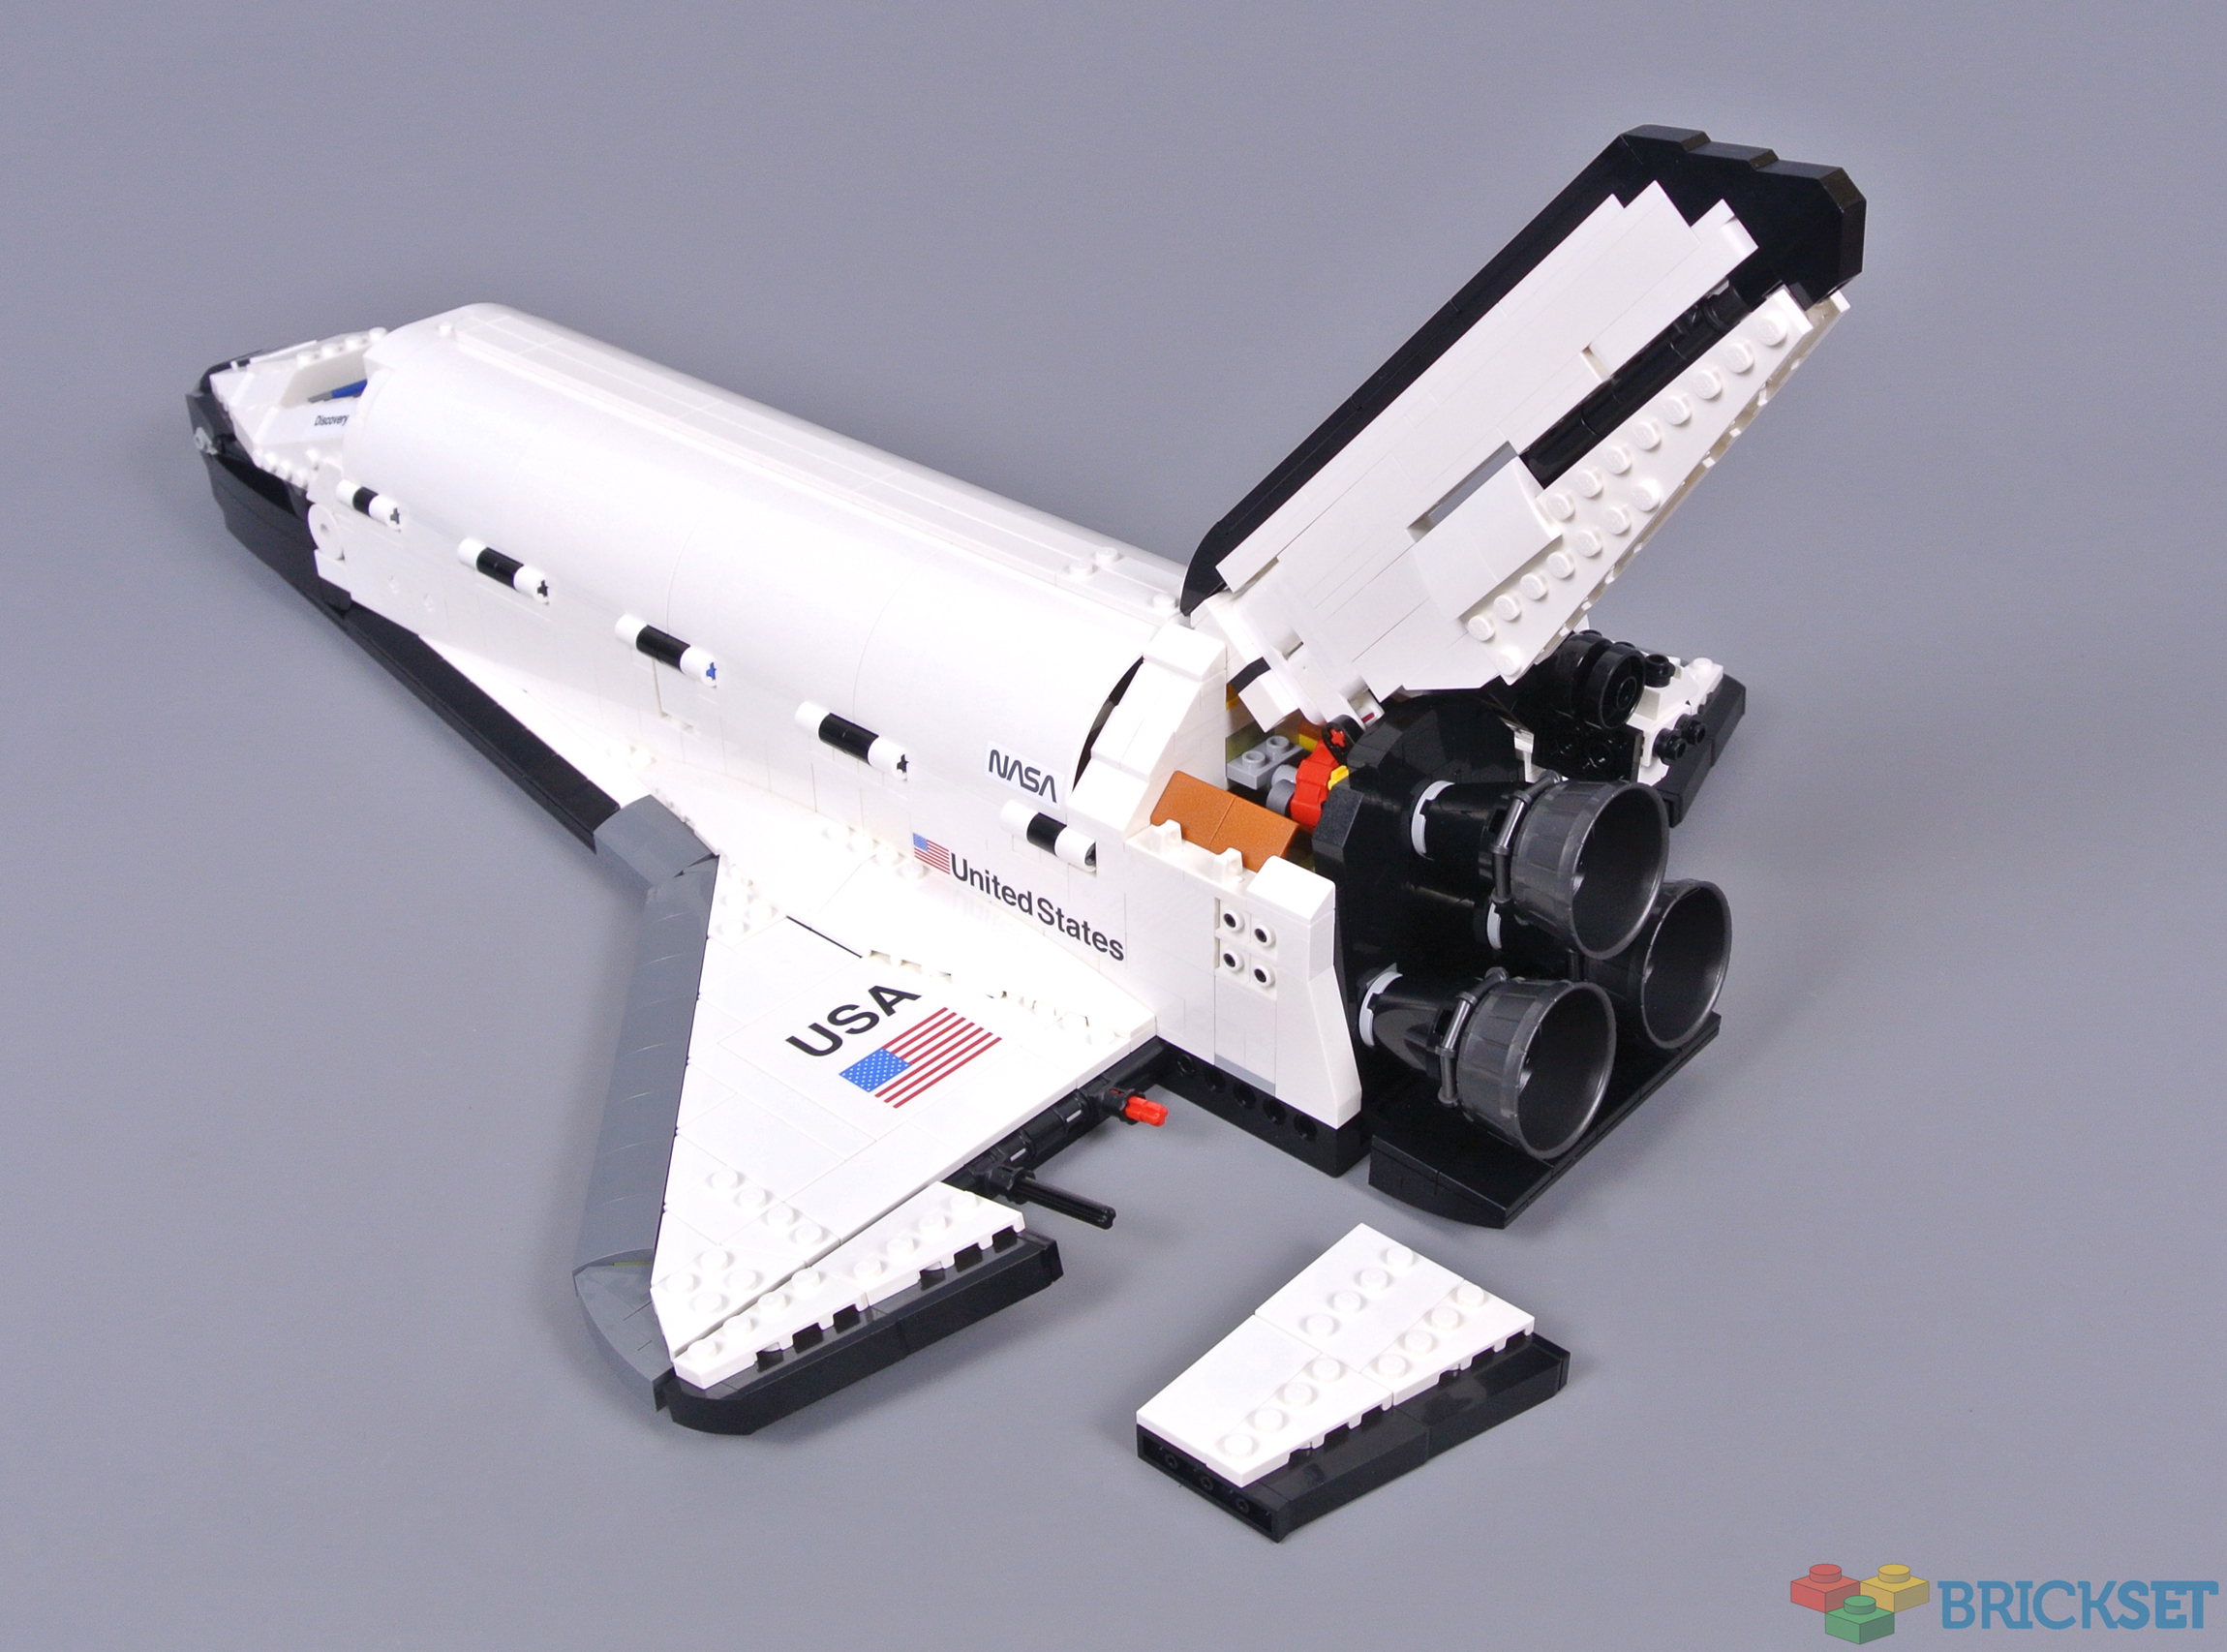 Review: 10283 NASA Space Shuttle Discovery Brickset: LEGO and database